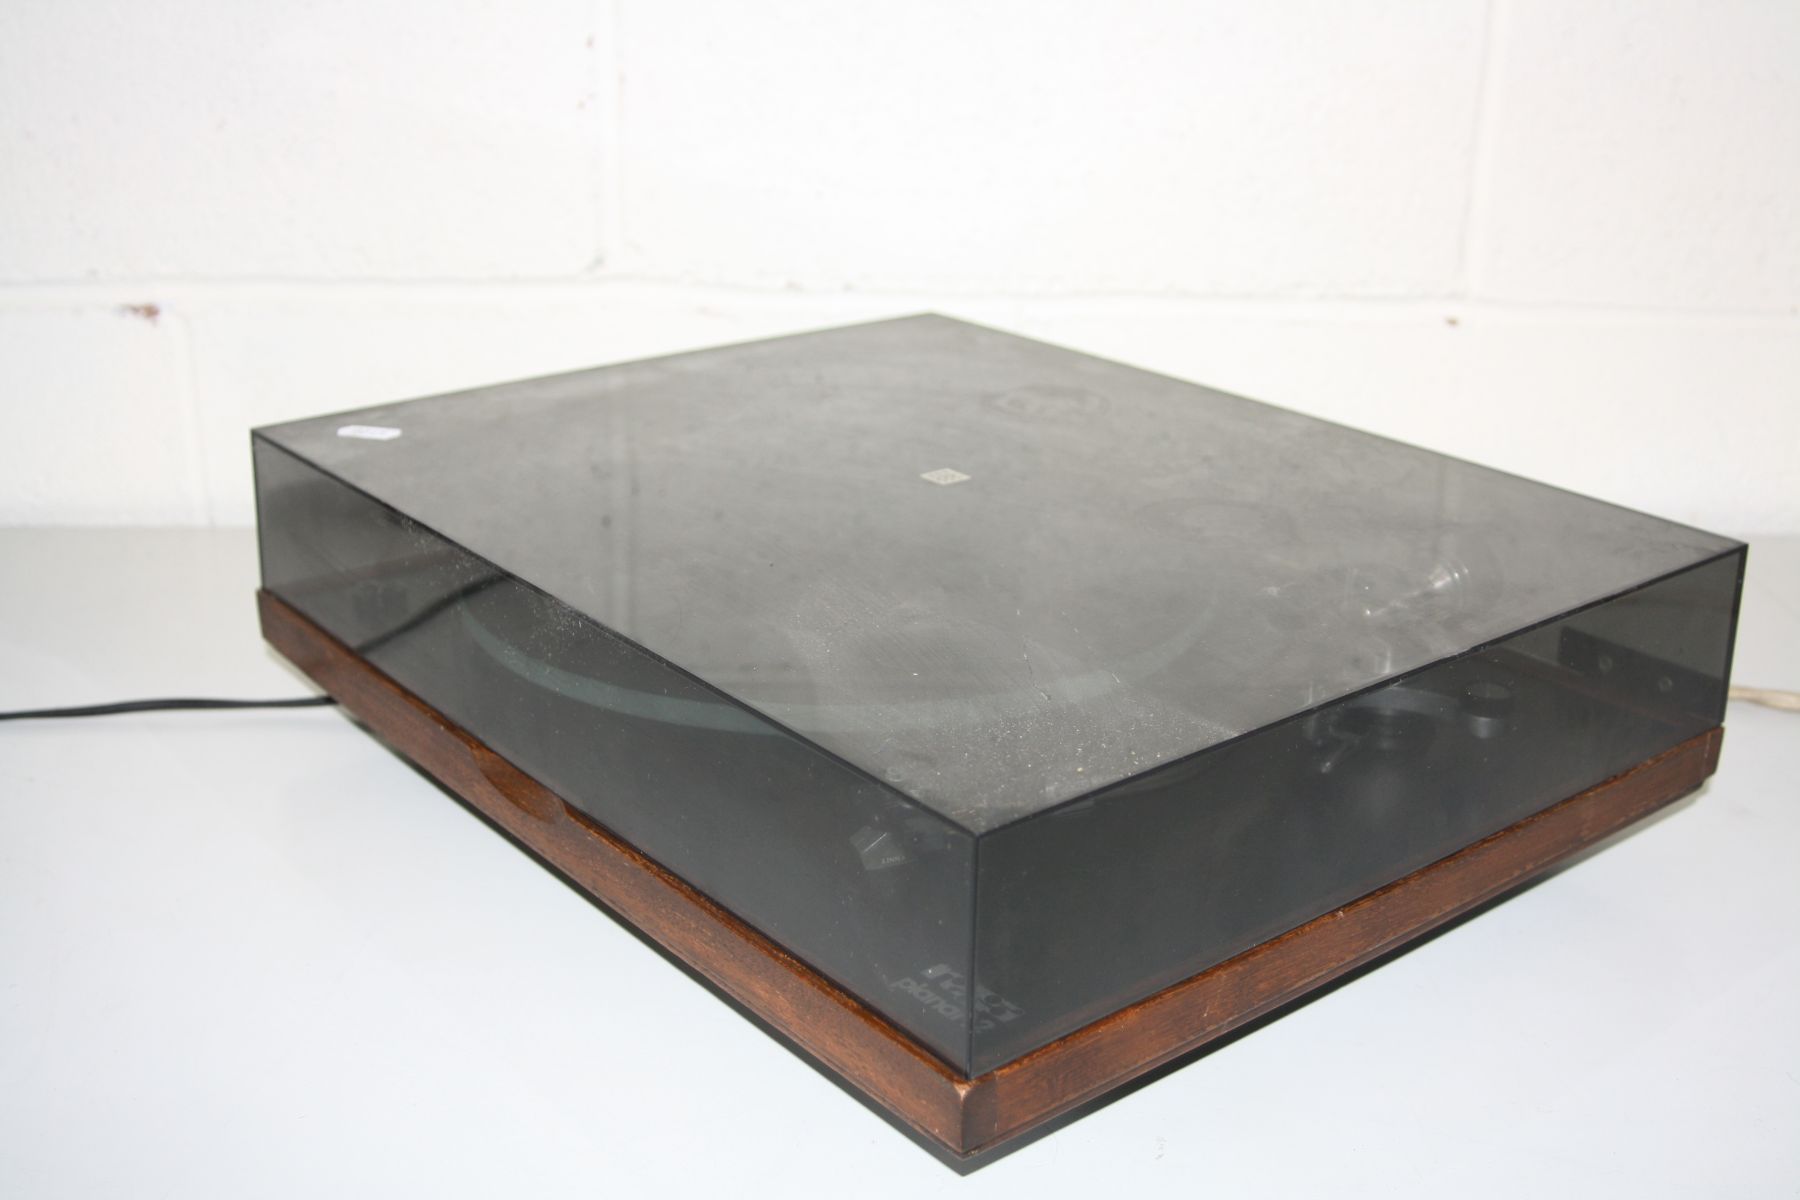 A REGA PLANER 2 TURNTABLE with a smoked perspex lid, a walnut plinth and a Linn K5 cartridge - Image 3 of 3